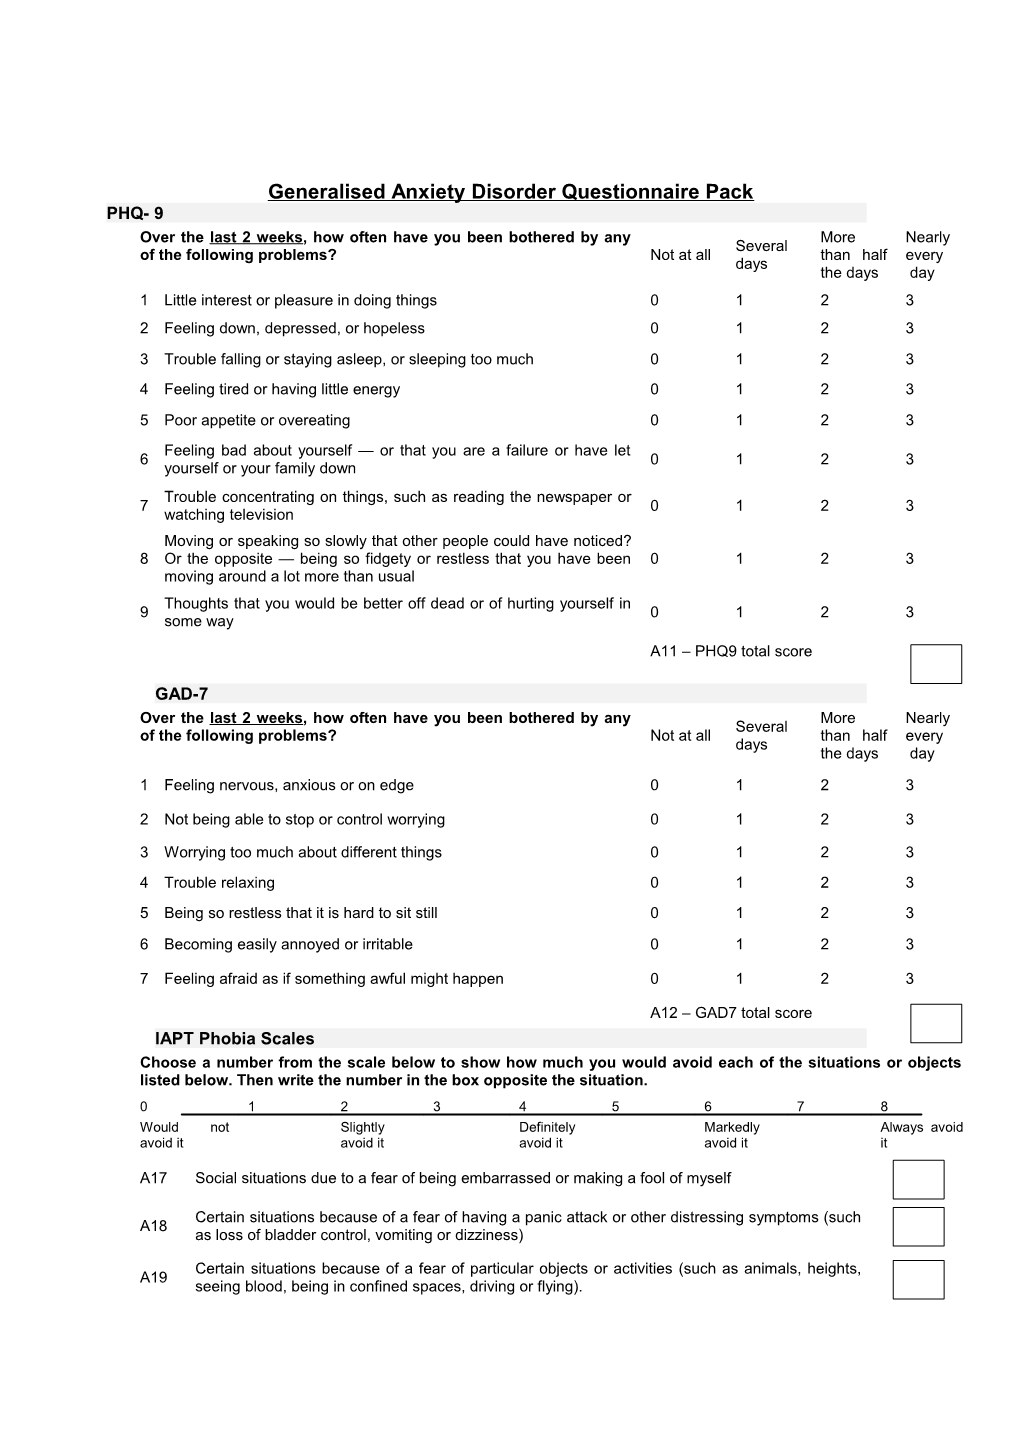 Generalised Anxiety Disorder Questionnaire Pack